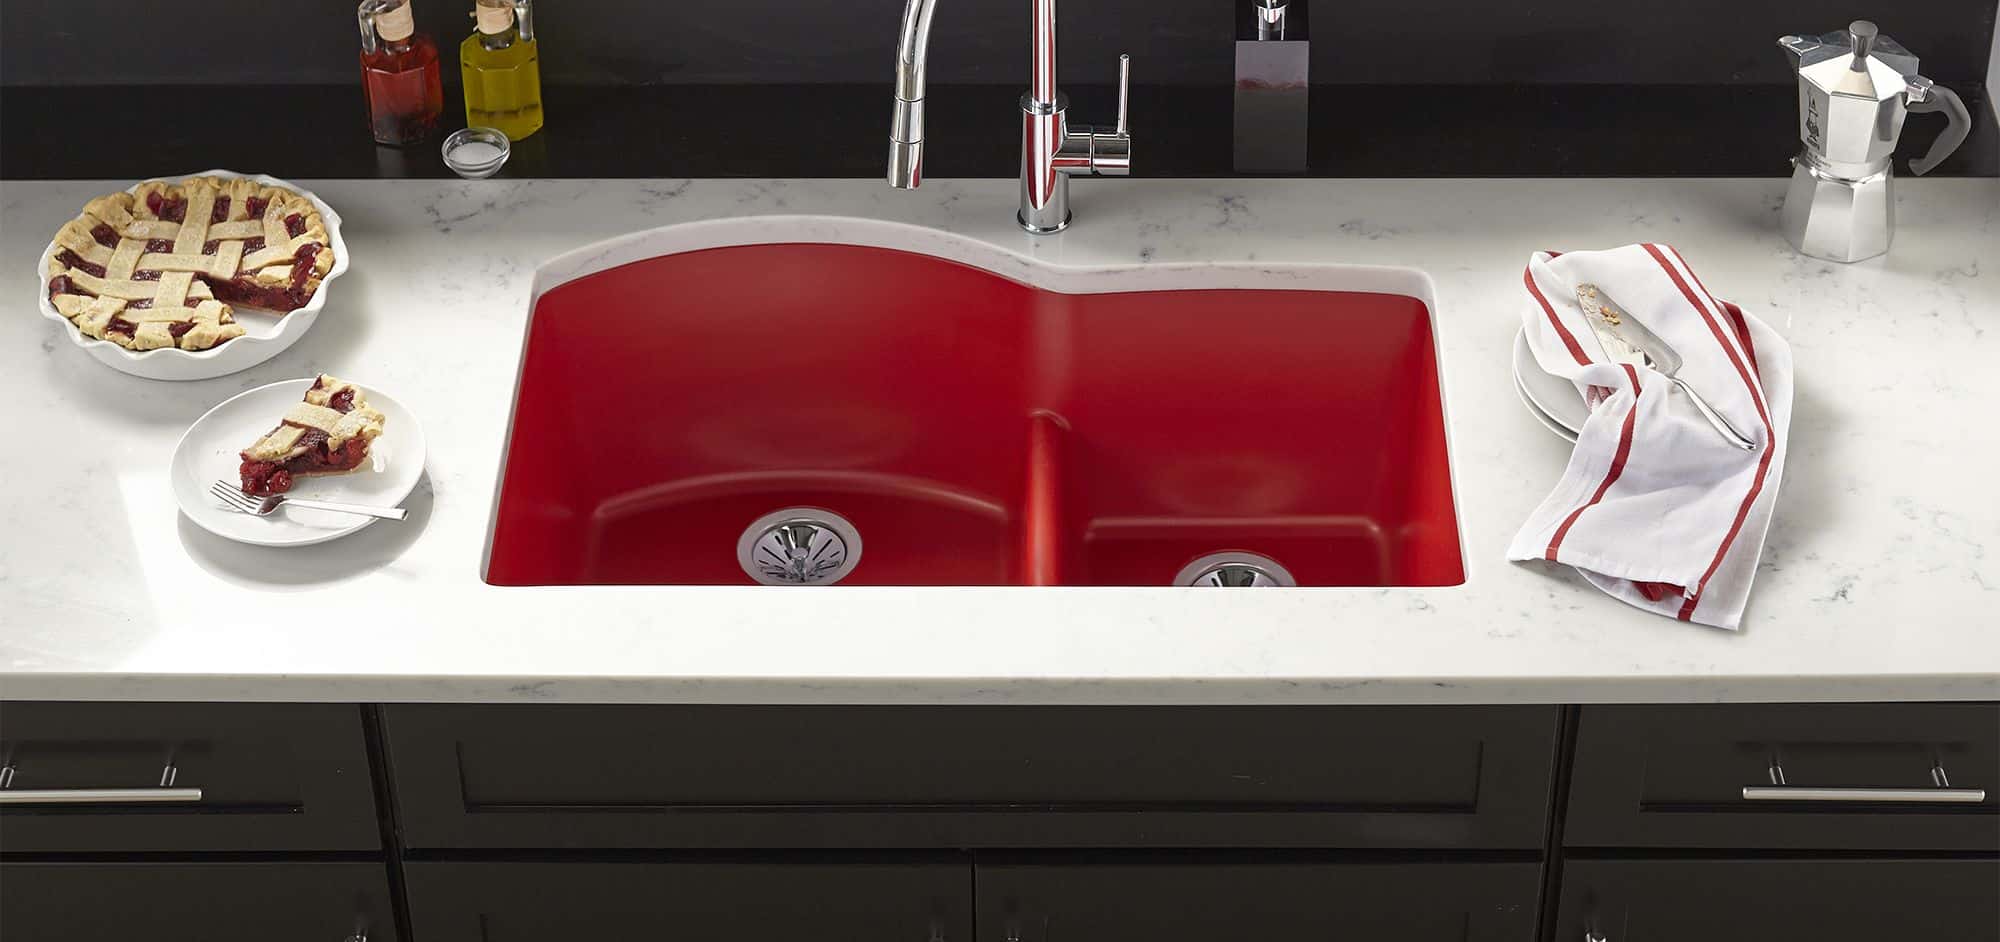 Colorful sink